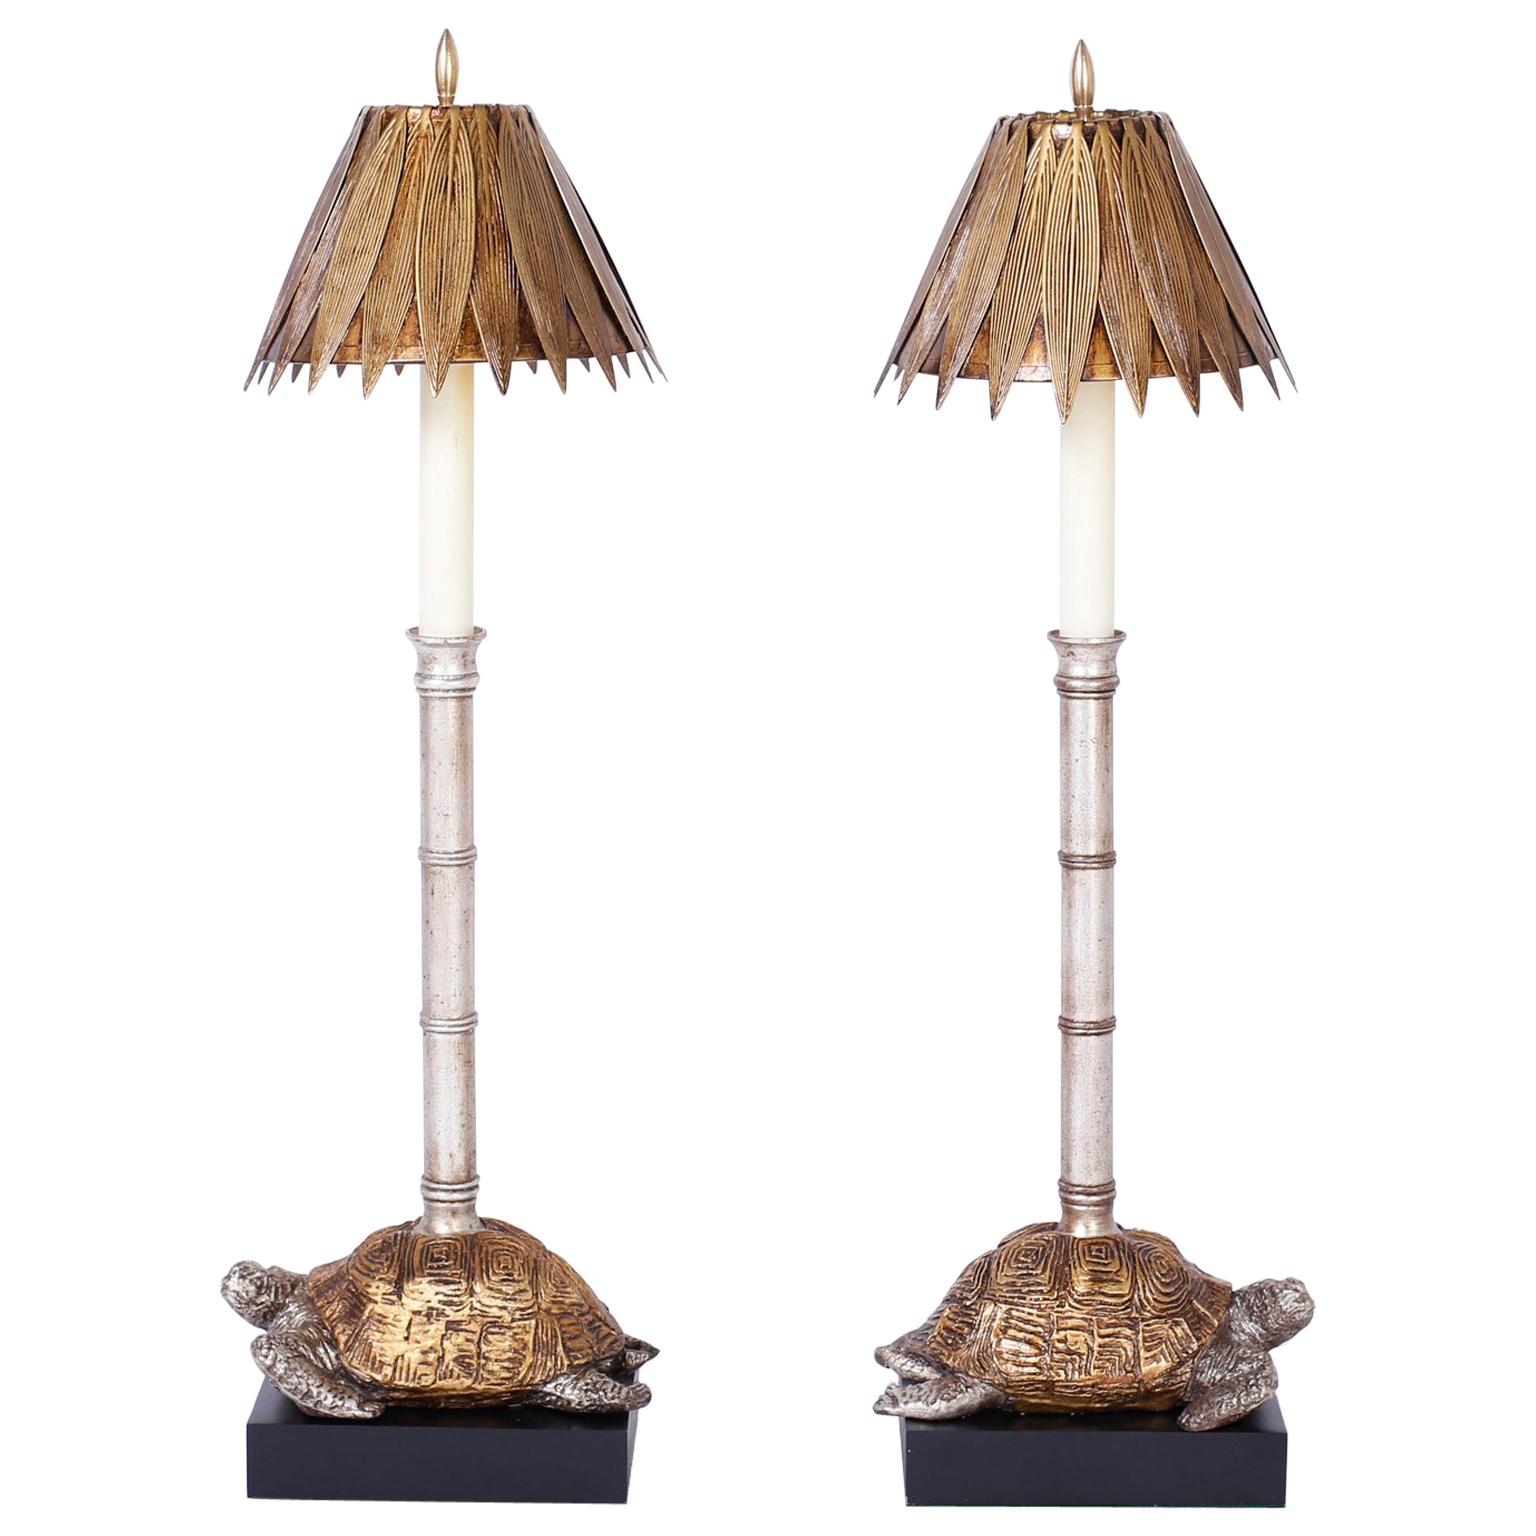 Pair of Turtle Table Lamps